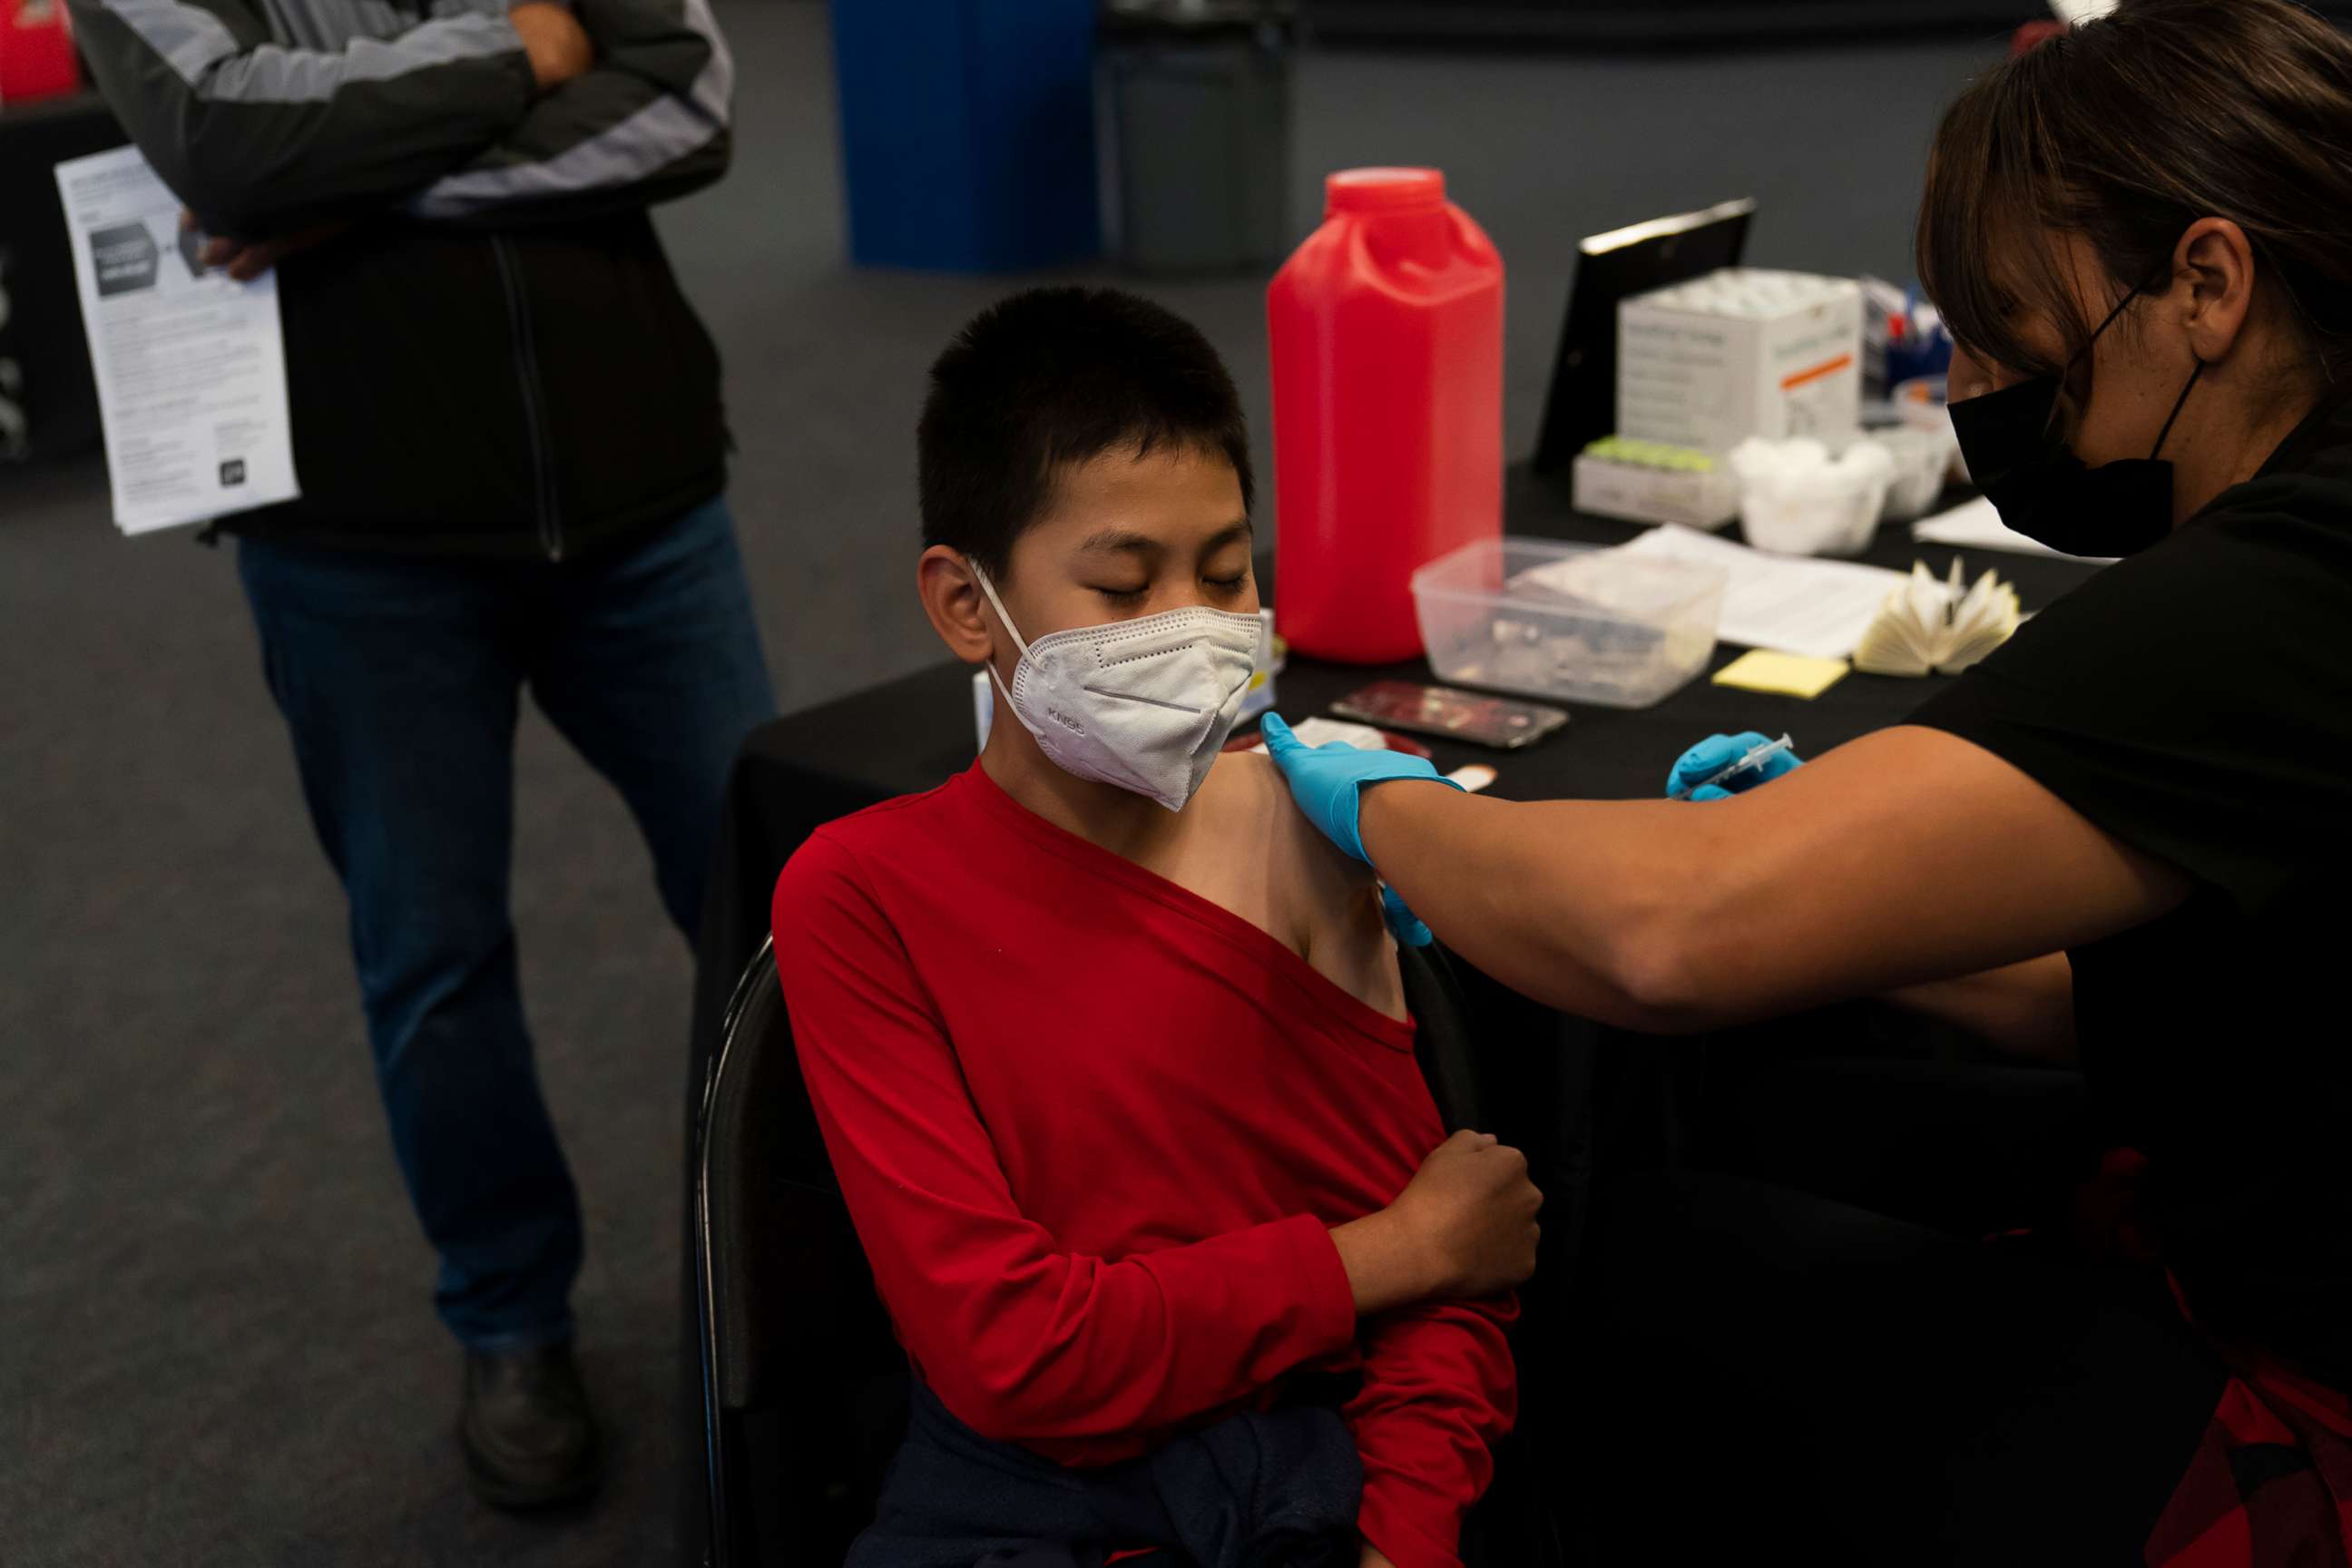 PHOTO: A youngster receives the Pfizer COVID-19 vaccine at a pediatric vaccine clinic for children ages 5 to 11 in Santa Ana, Calif., Nov. 9, 2021.